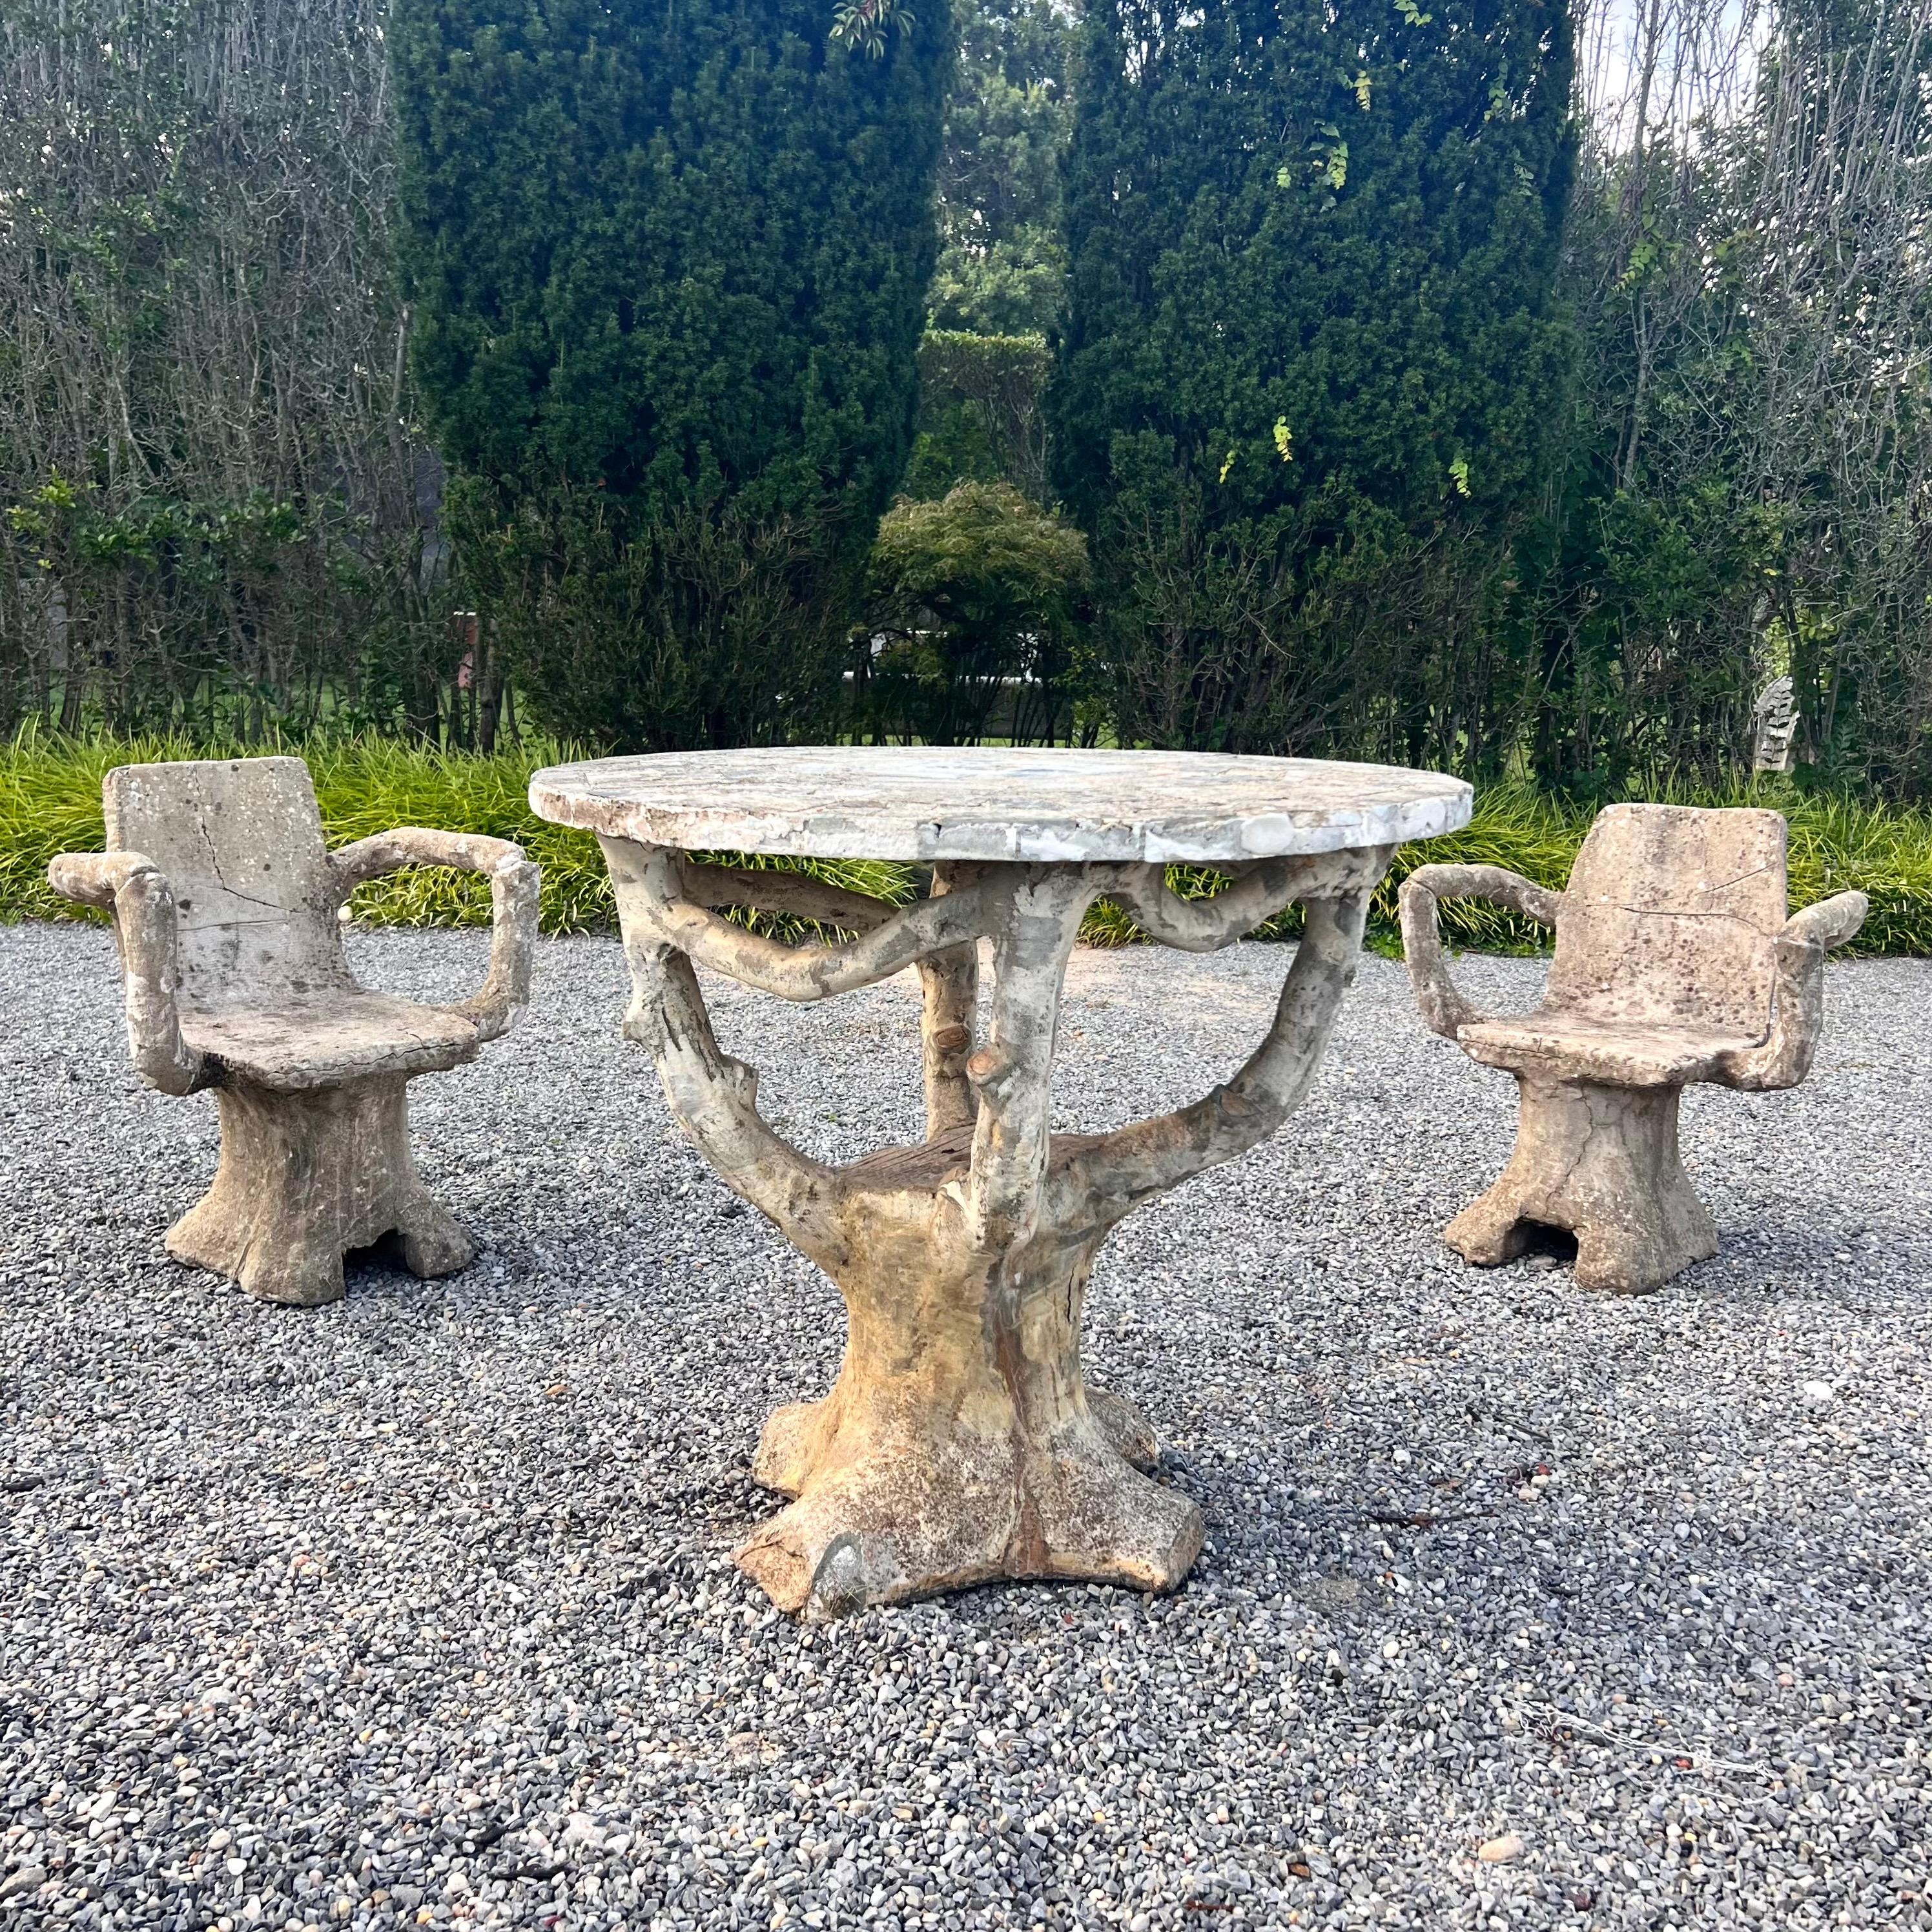 Anthropomorphic Faux Bois Concrete Table and 4 Chairs, 1950s France For Sale 1